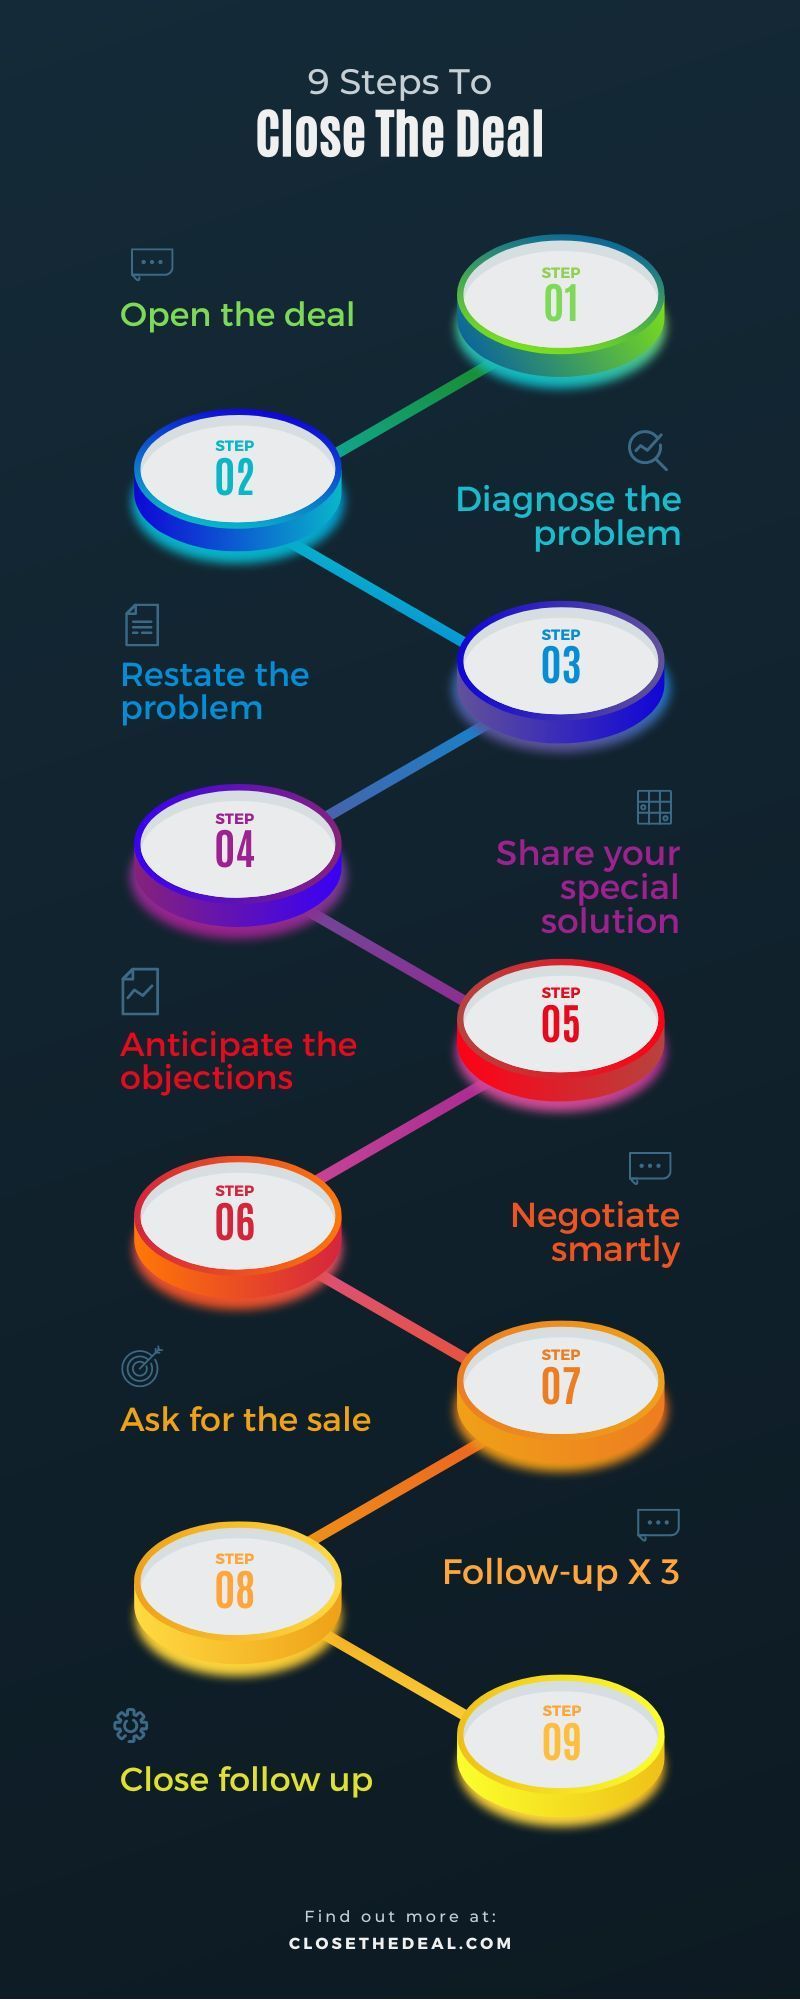 How to close the deal in 9 (nine) steps - closethedeal.com